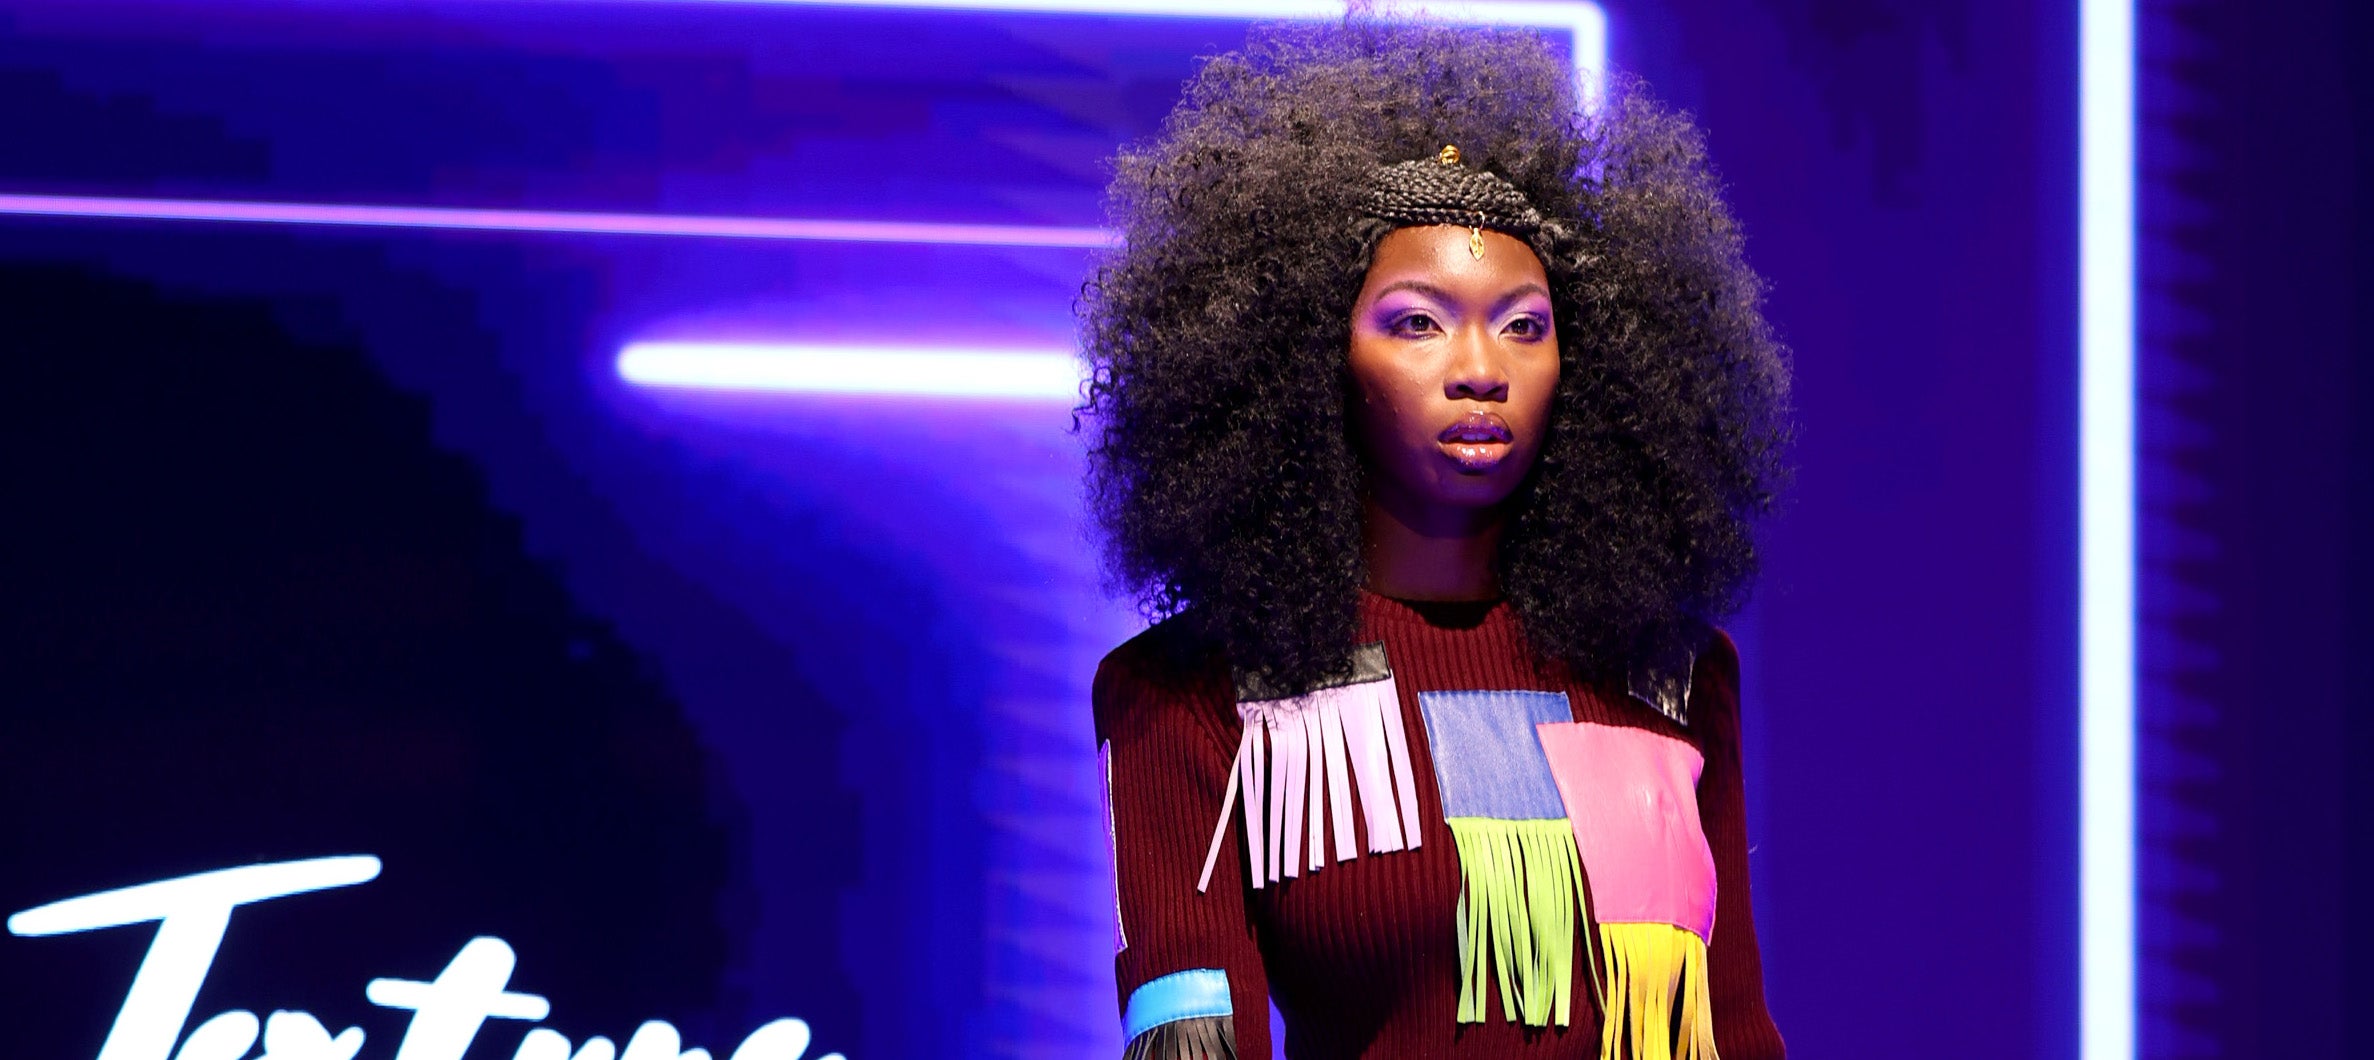 Beautycon’s “Texture On The Runway” Was A Front Row Seat To A Celebration Of Black Hair